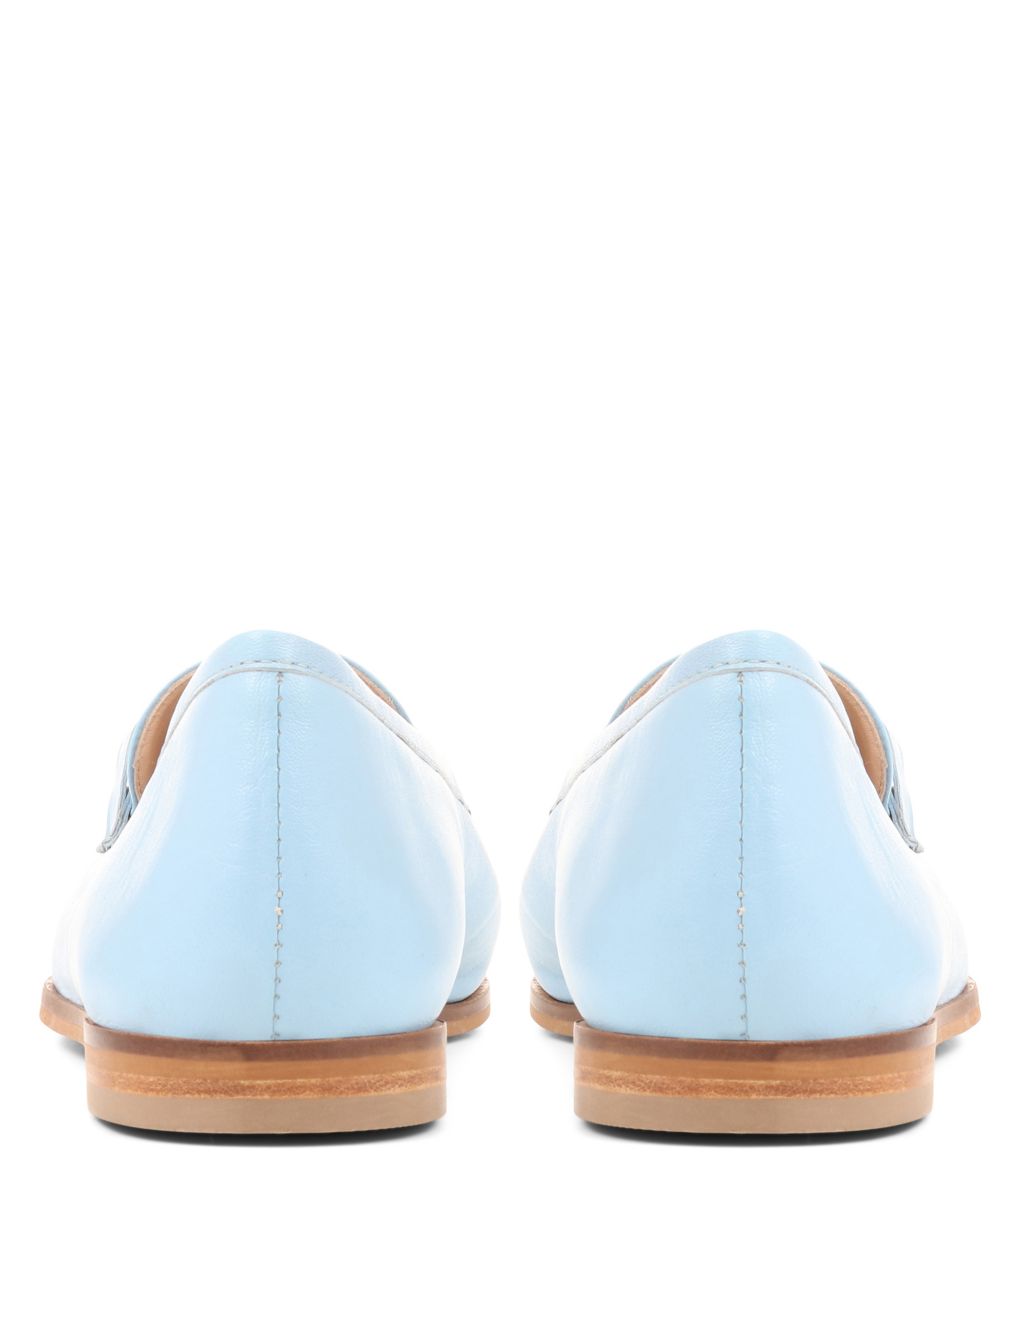 Leather Slip On Bar Flat Loafers image 4